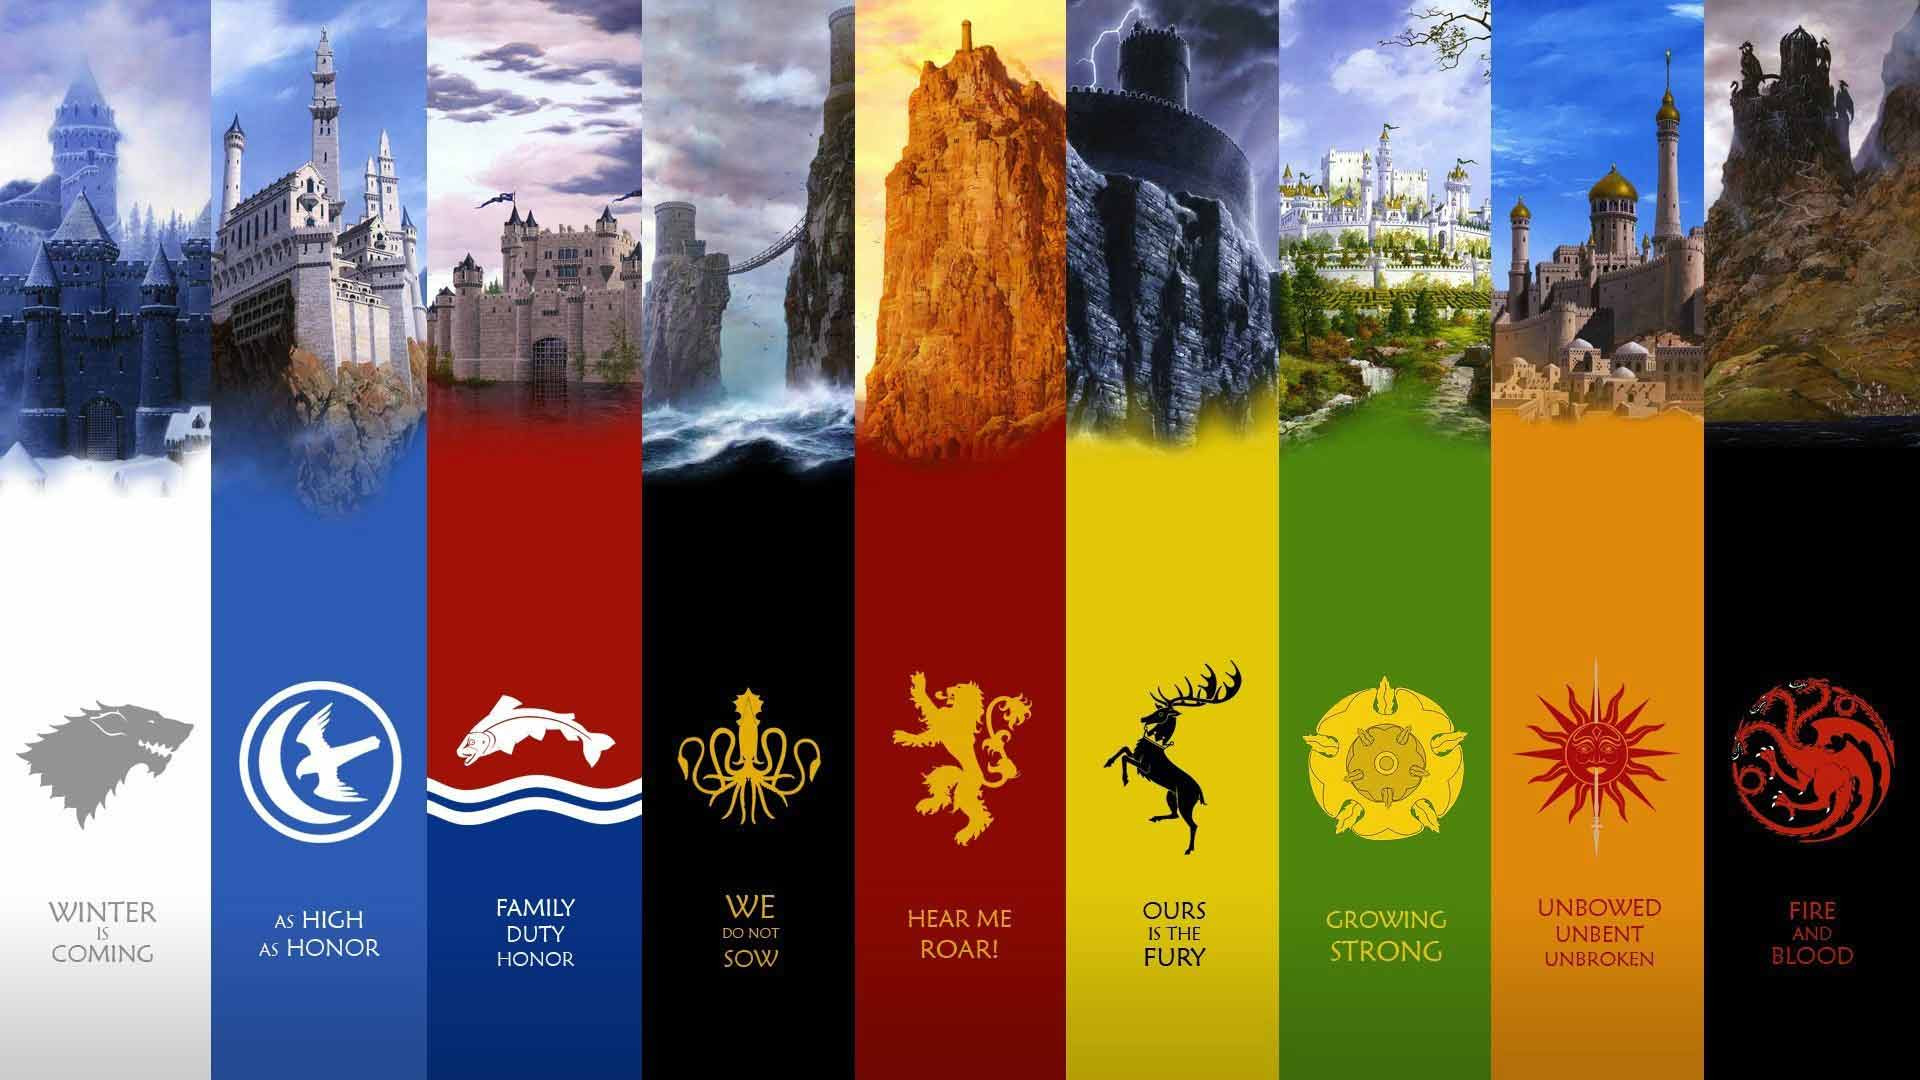 Game of Thrones, canh nong dong tinh